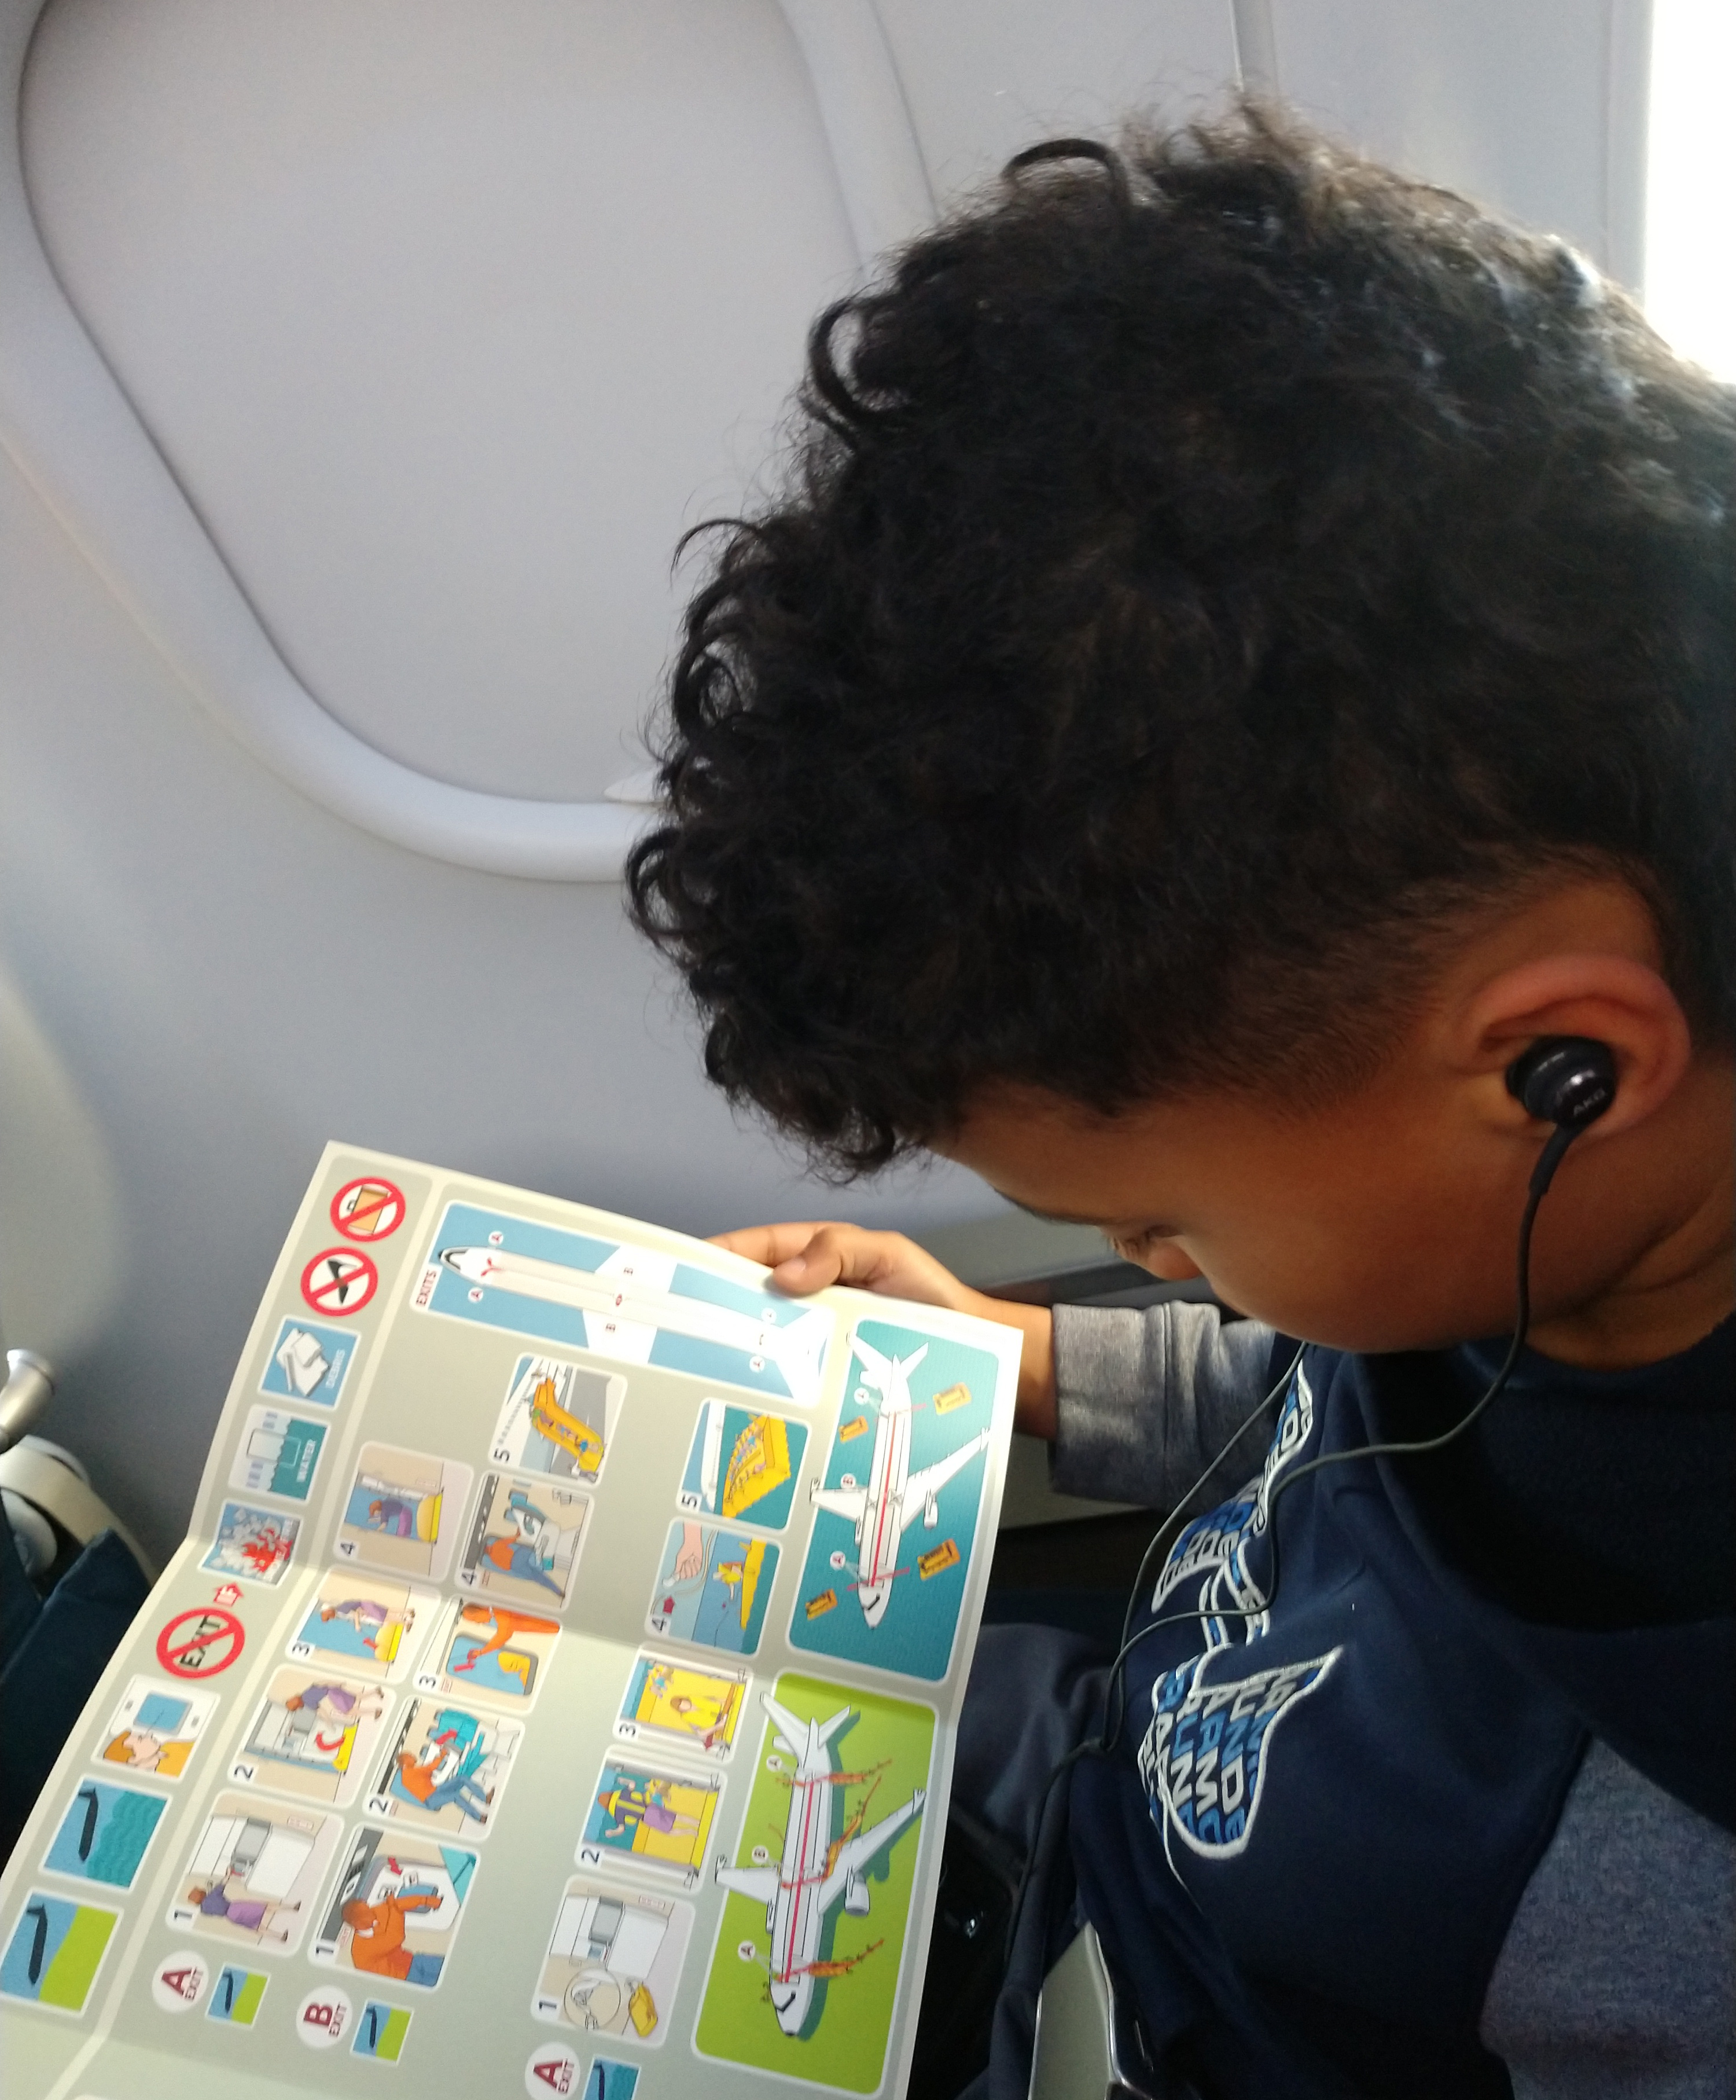 Ruell reading airplane safety brochure